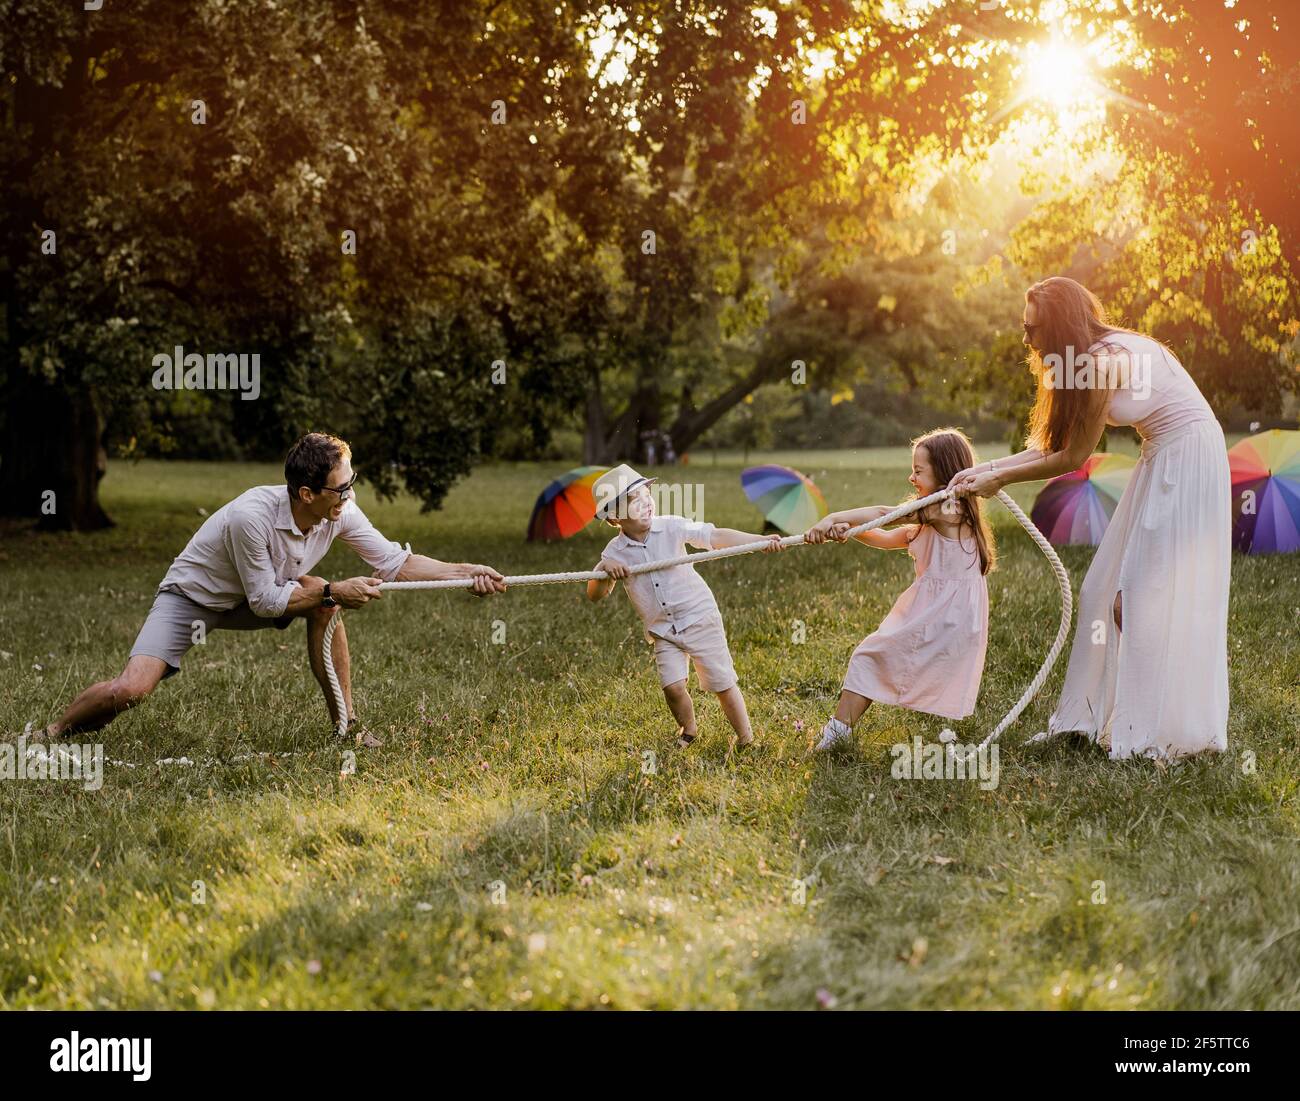 Joyful, young family playing tug-of-war in the park Stock Photo